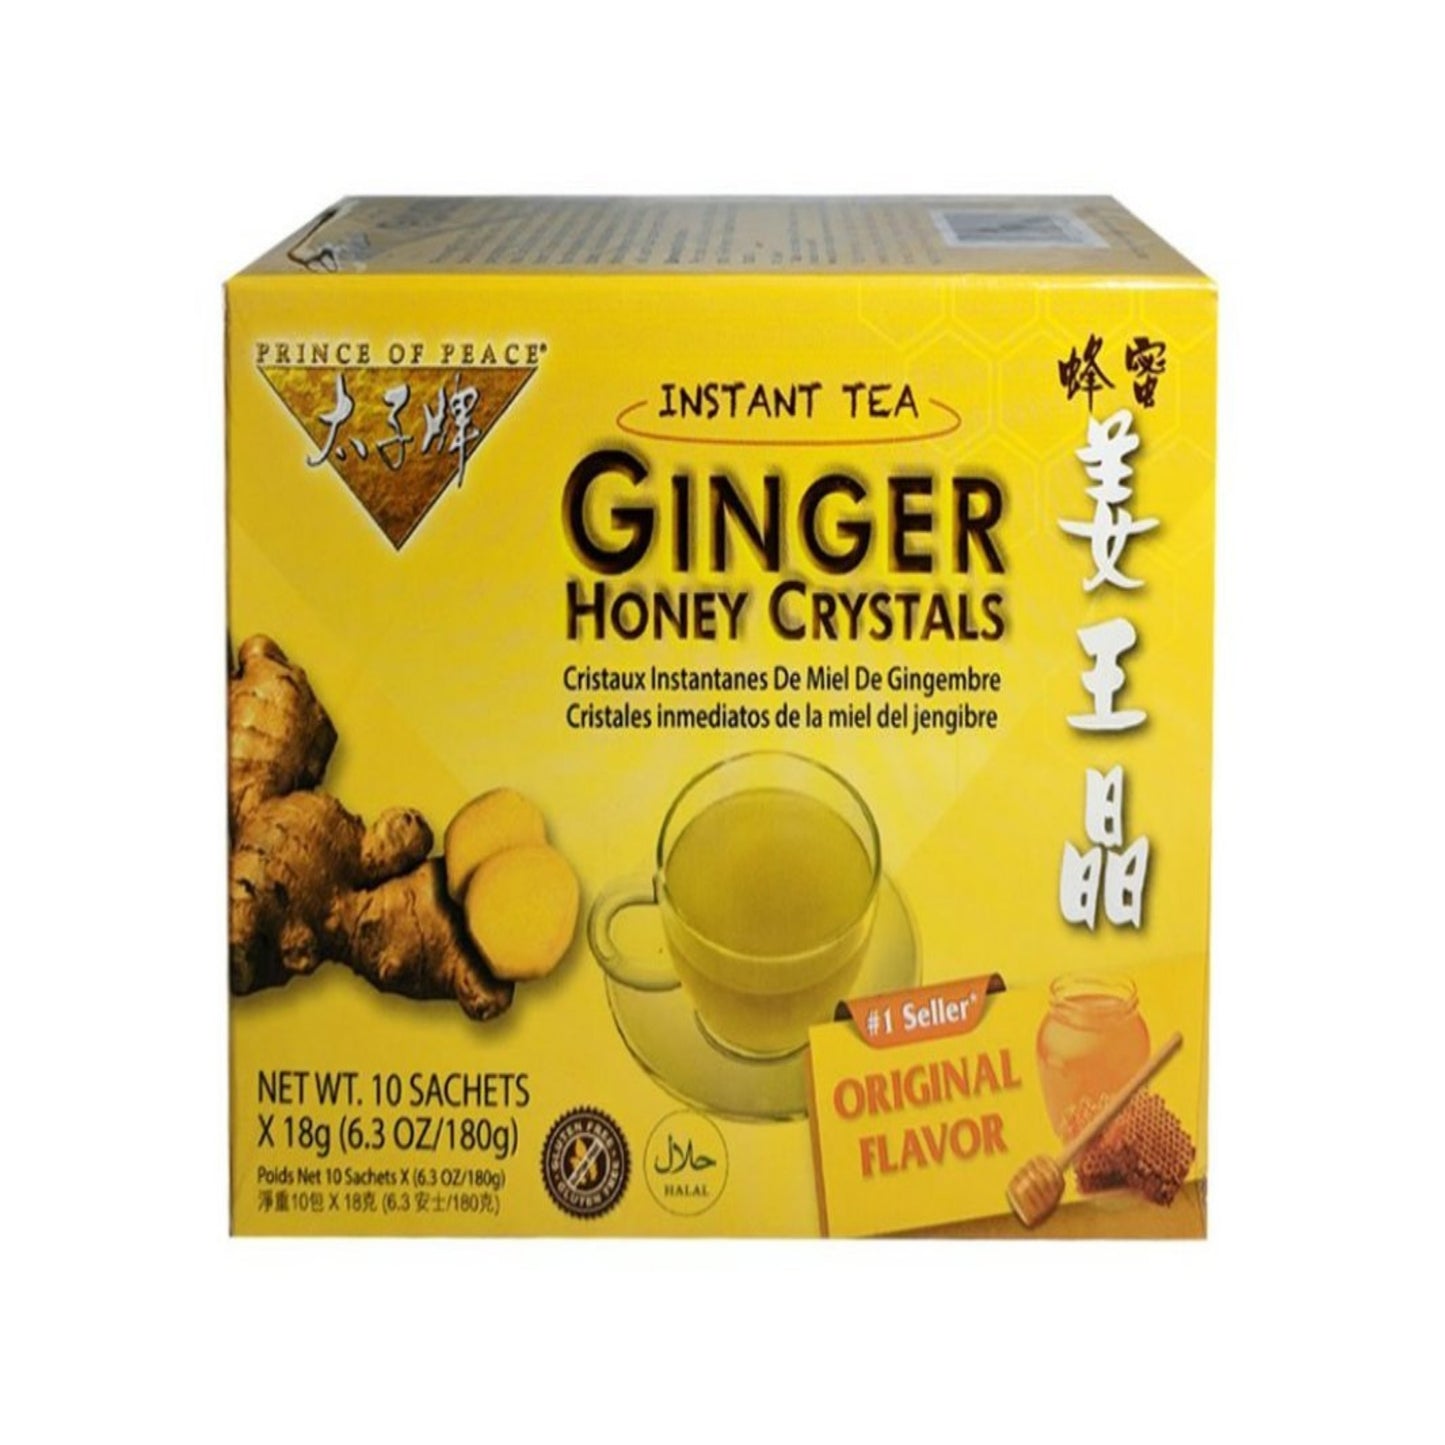 Front graphic image of Prince of Peace Ginger Honey Crystals Tea 6.3oz